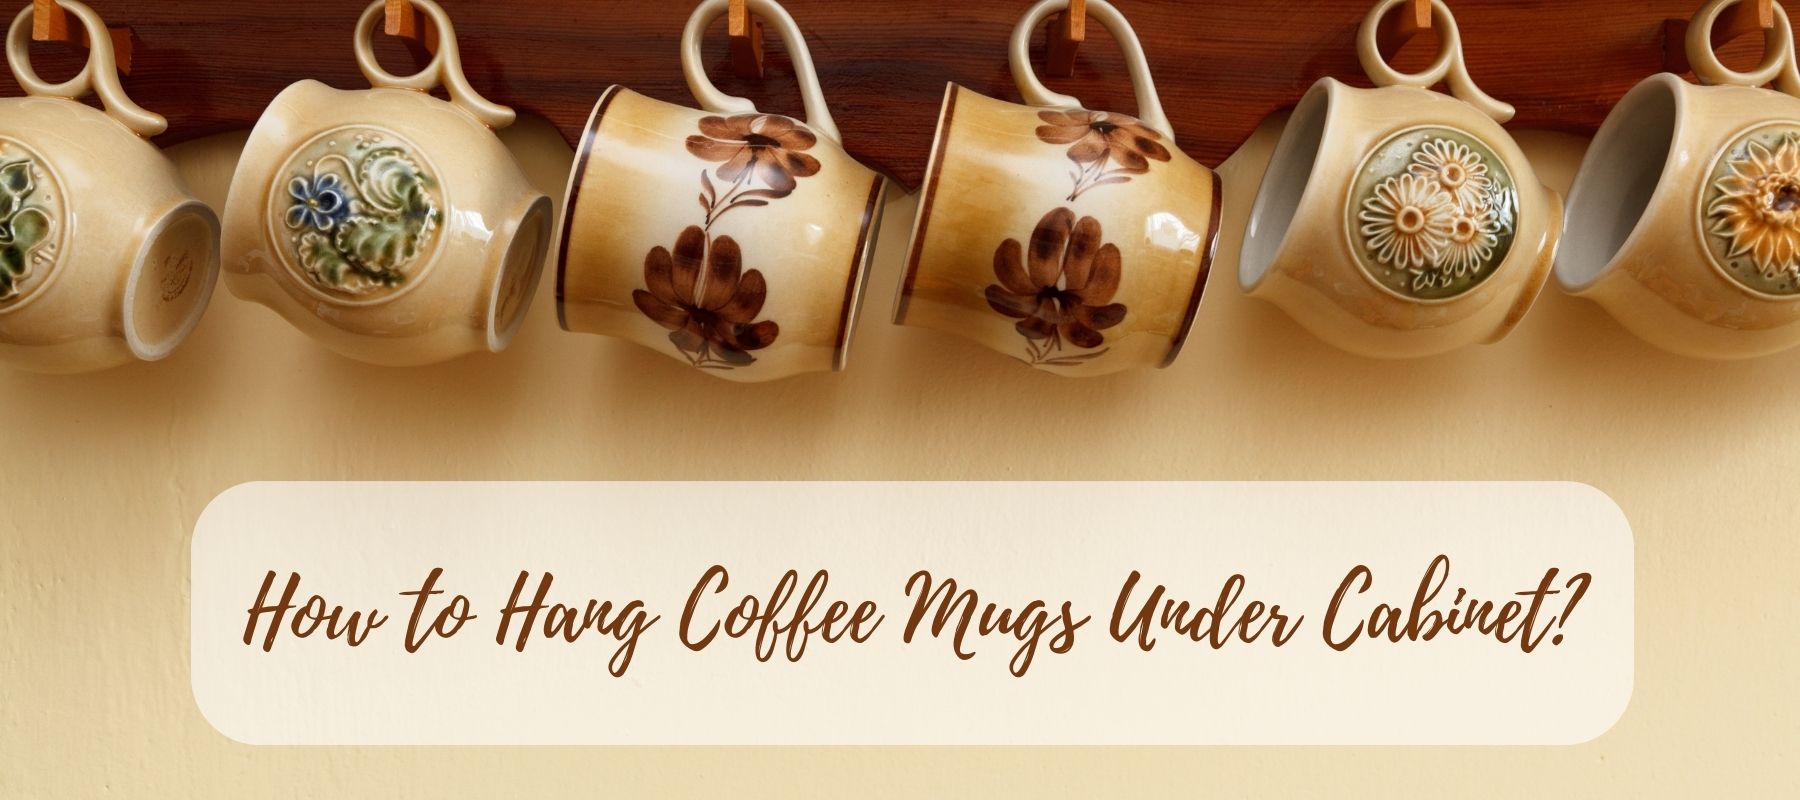 How-to-hang-Coffee-Mugs-Under-Cabinet